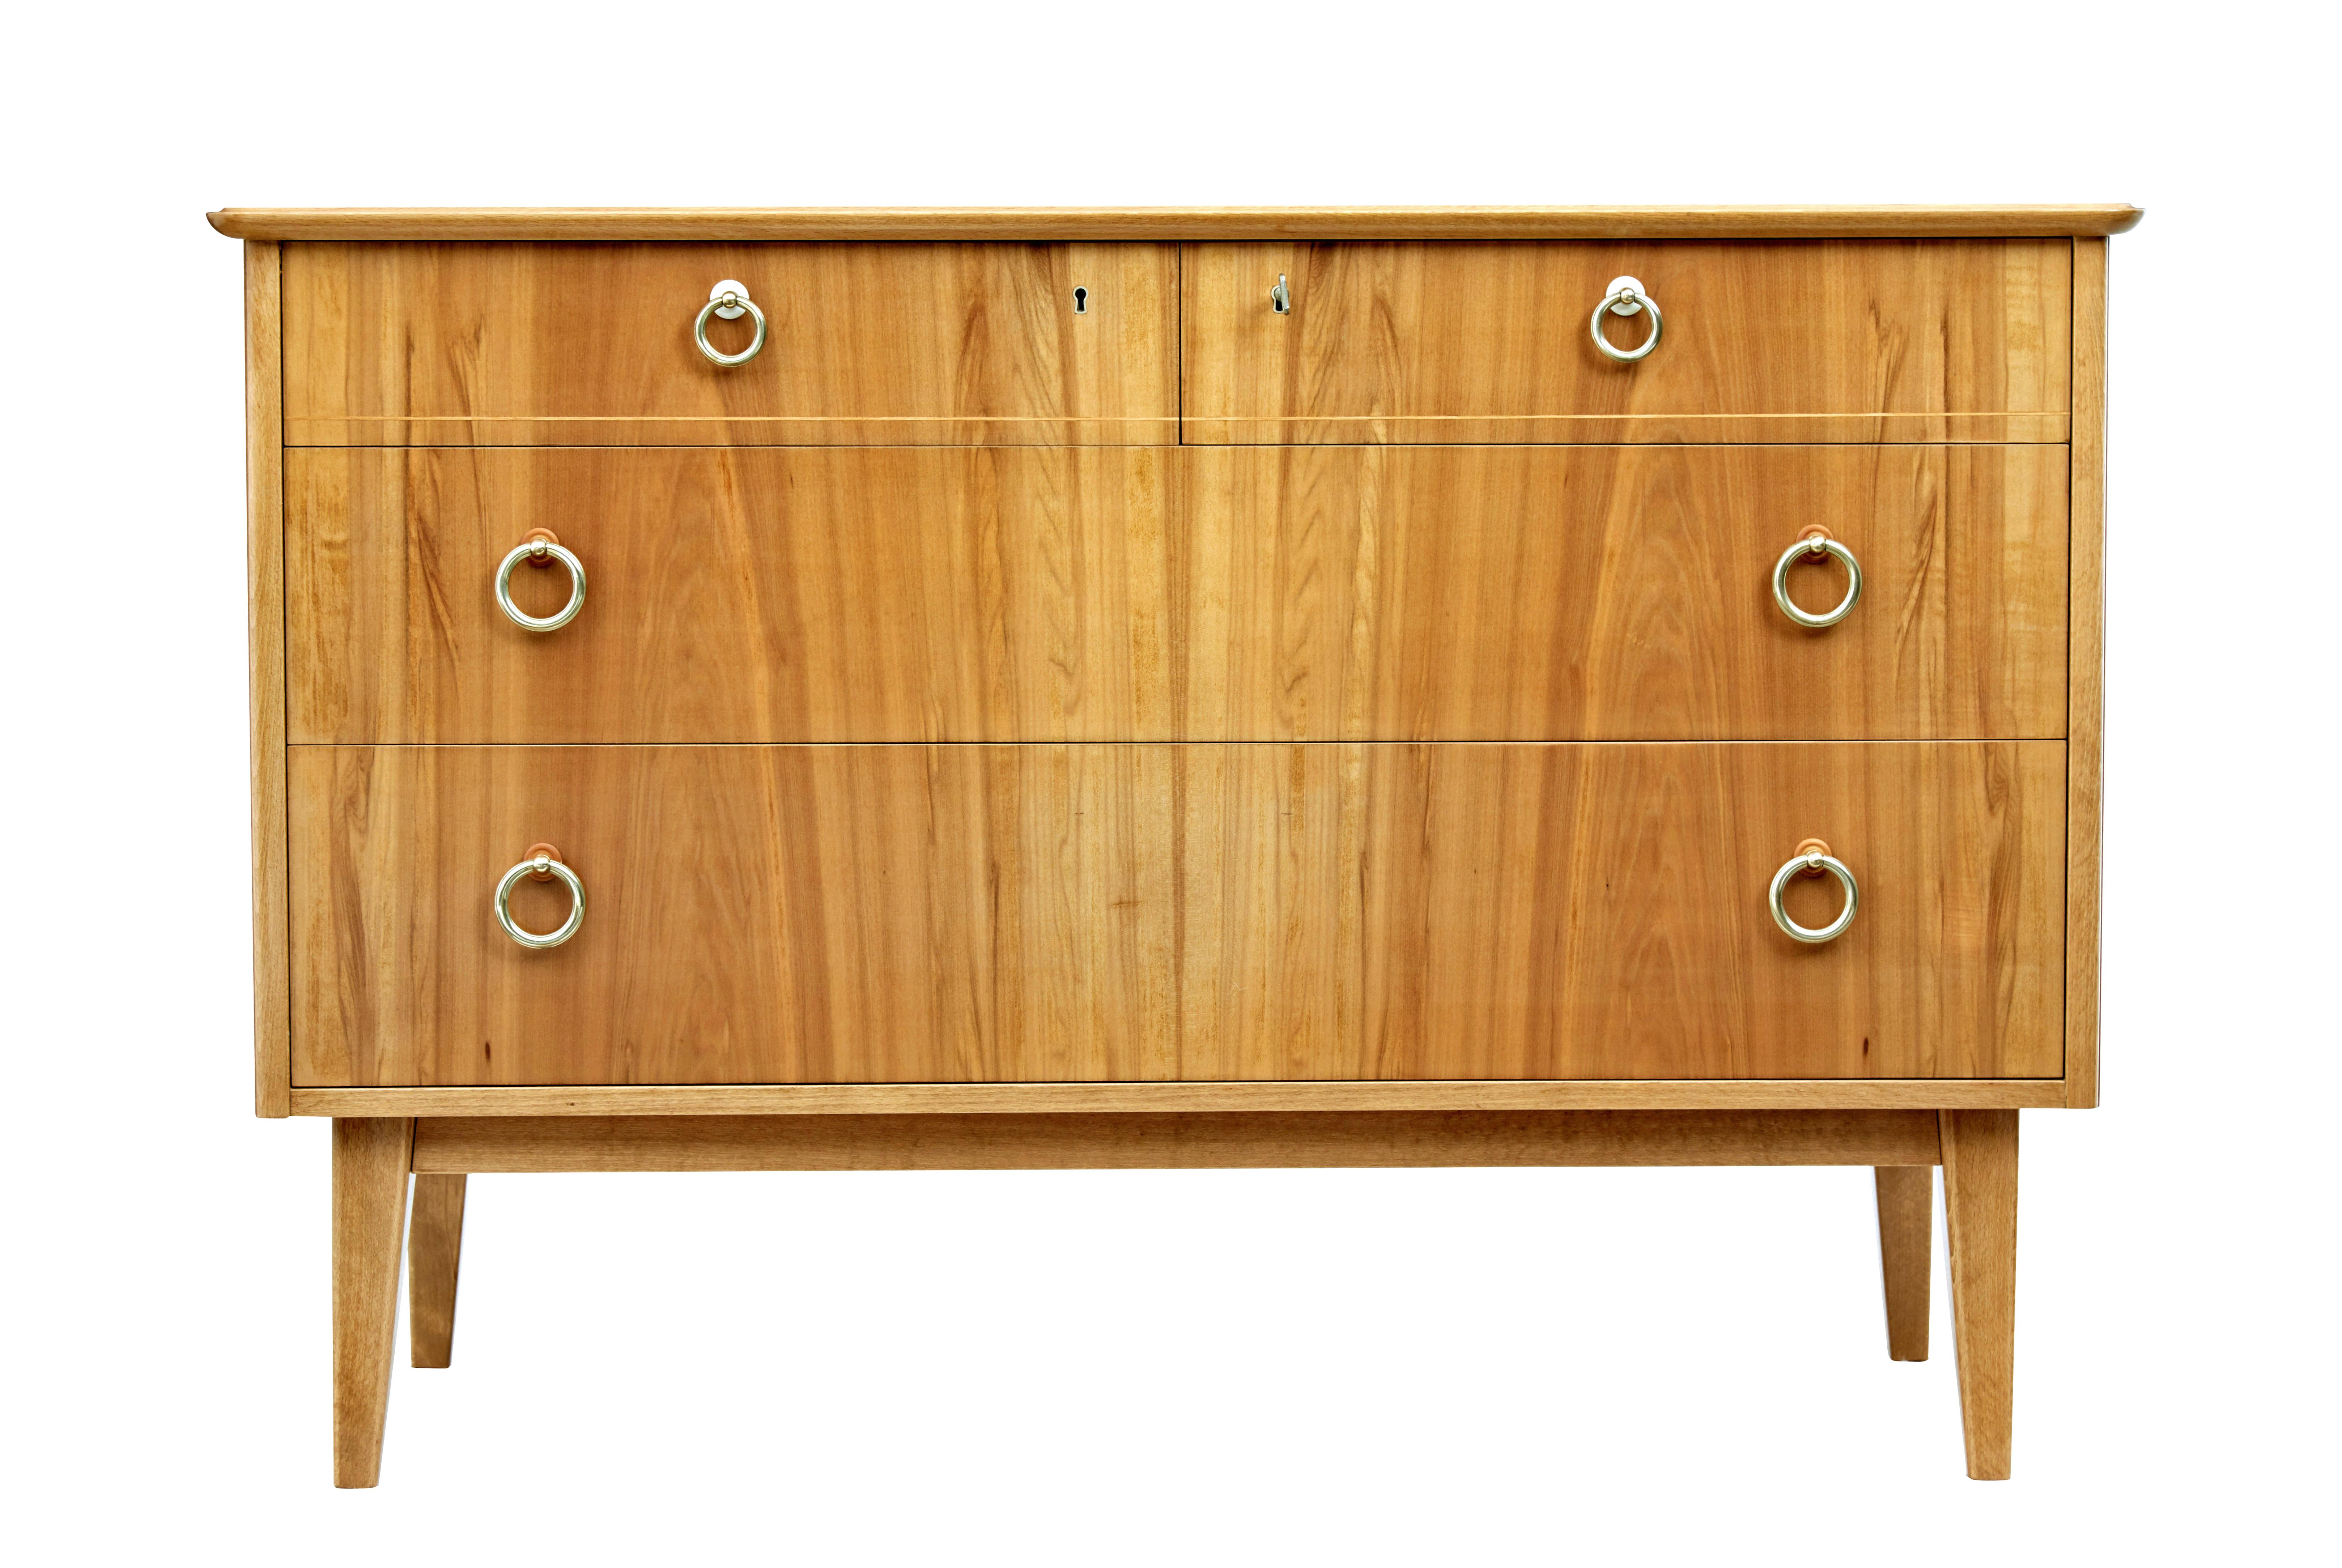 Mid 20th century swedish walnut chest of drawers by bodafors circa 1950.

Good quality chest of drawers finished in light walnut.  Fitted with 4 graduating drawers in a 2 over 2 layout, complete with original brass ring handles.  Stringing detail to